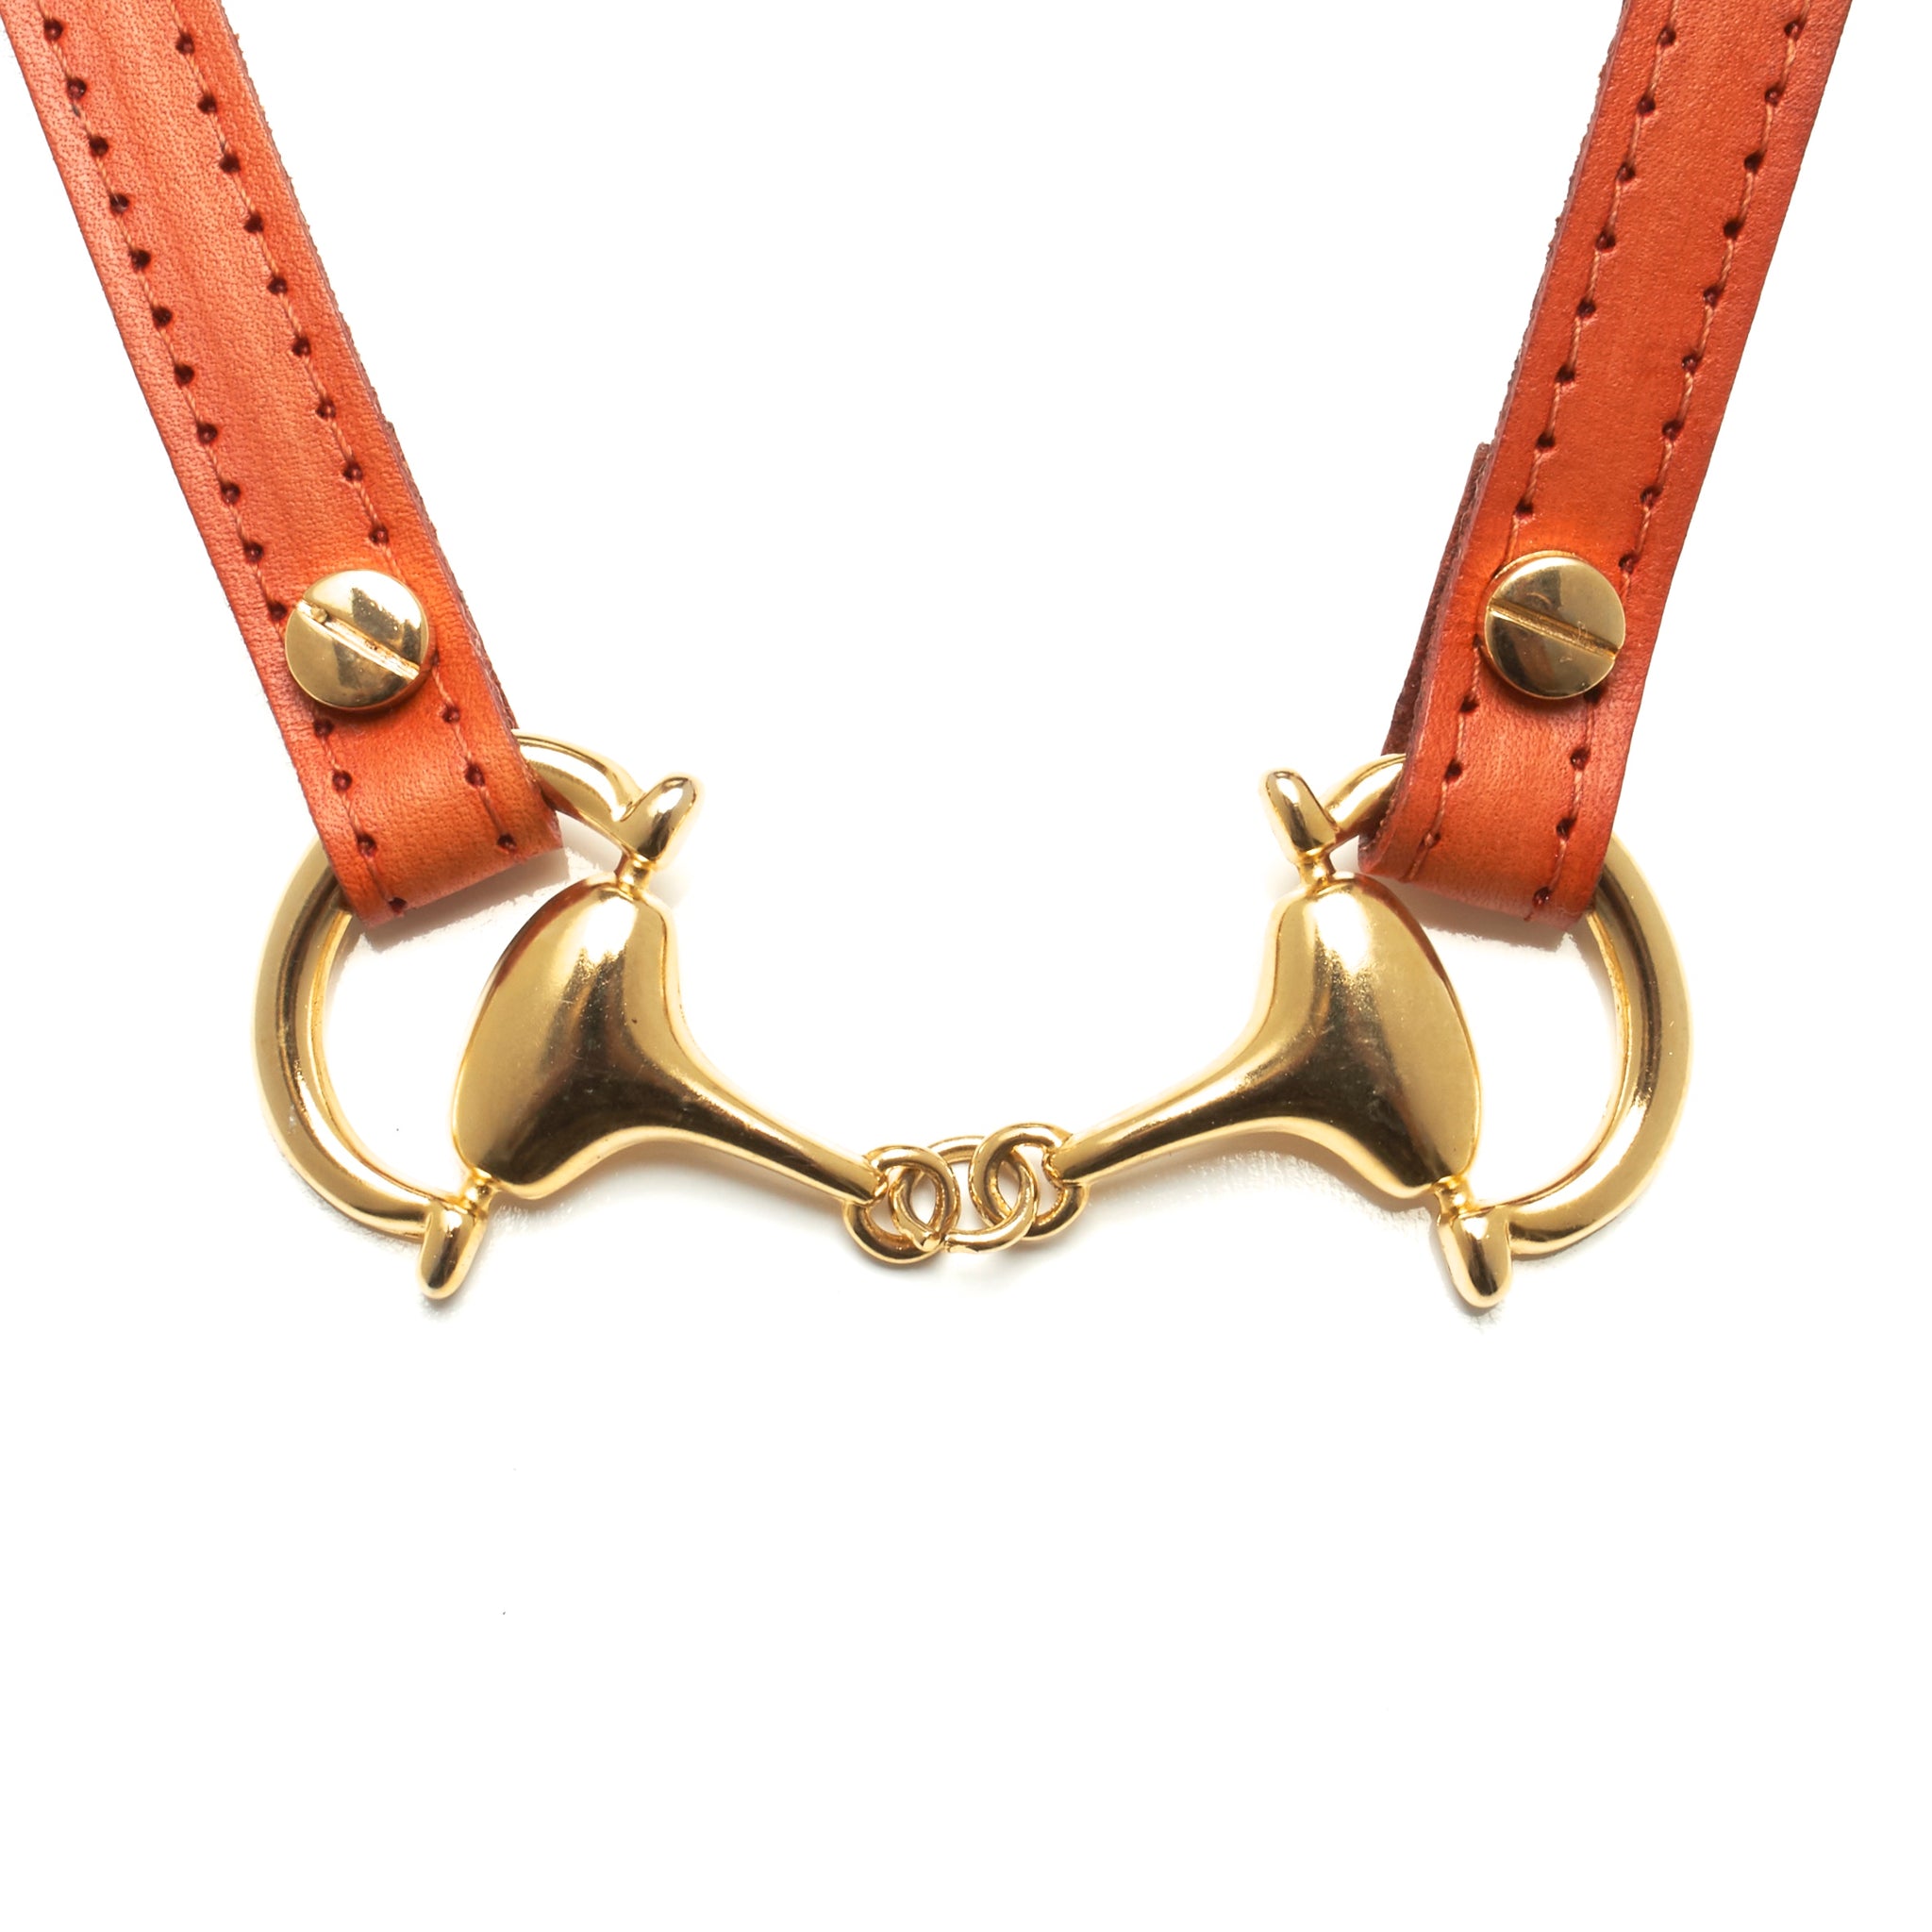 xxxxxxLEATHER CHOKER NECKLACE WITH D-RING HORSE BIT PENDANT by nyet jewelry 